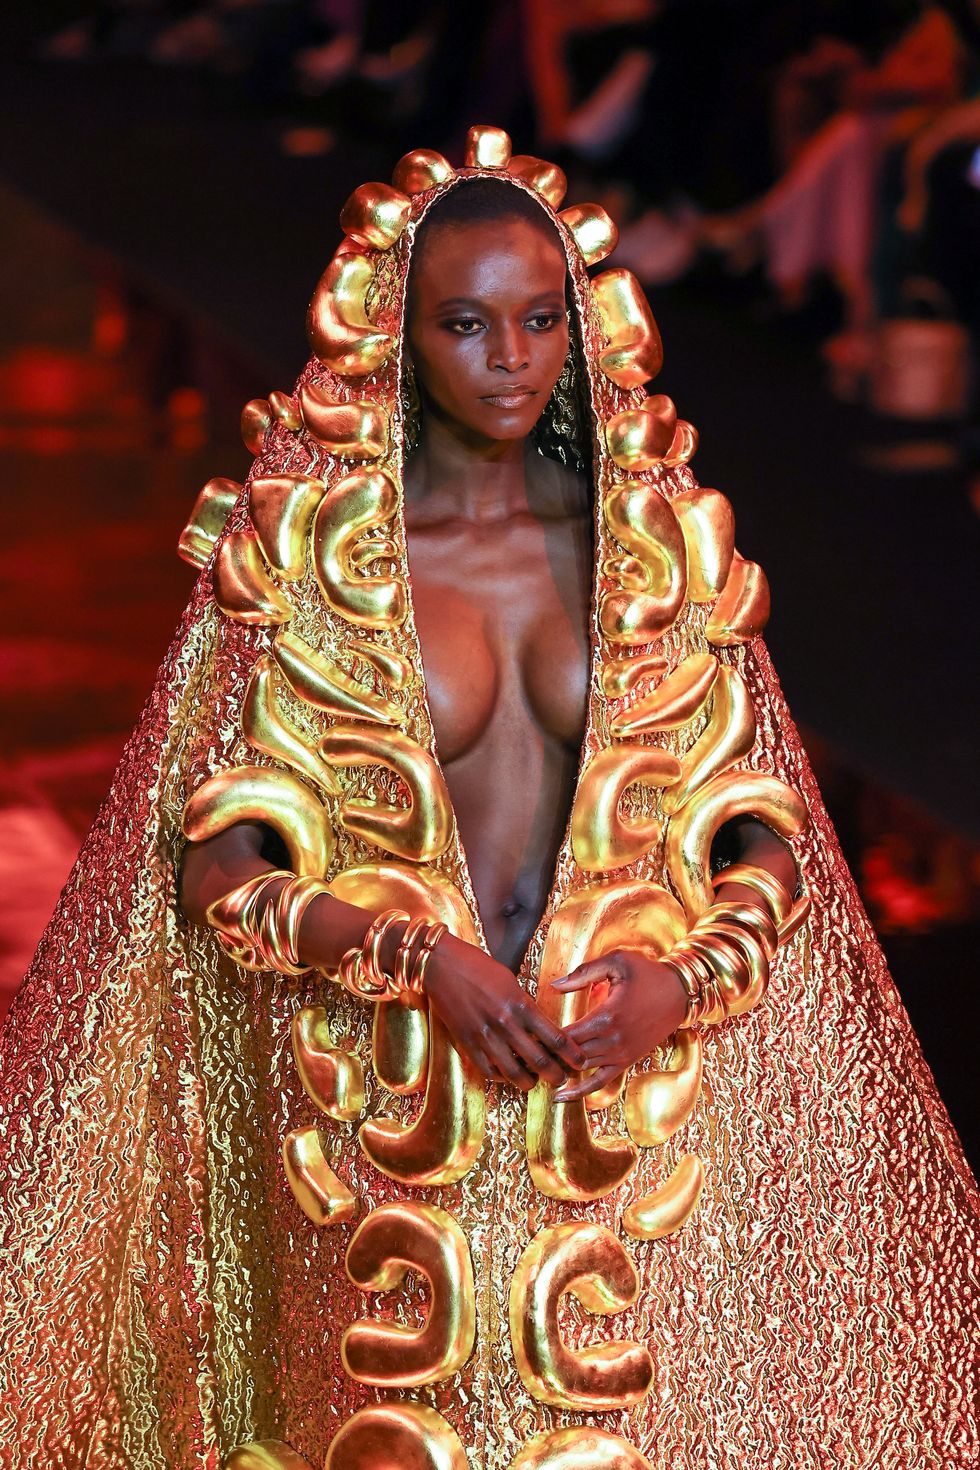 paris, france january 24 editorial use only for non editorial use please seek approval from fashion house a model walks the runway during the stephane rolland haute couture spring summer 2023 show as part of paris fashion week on january 24, 2023 in paris, france photo by peter whitegetty images